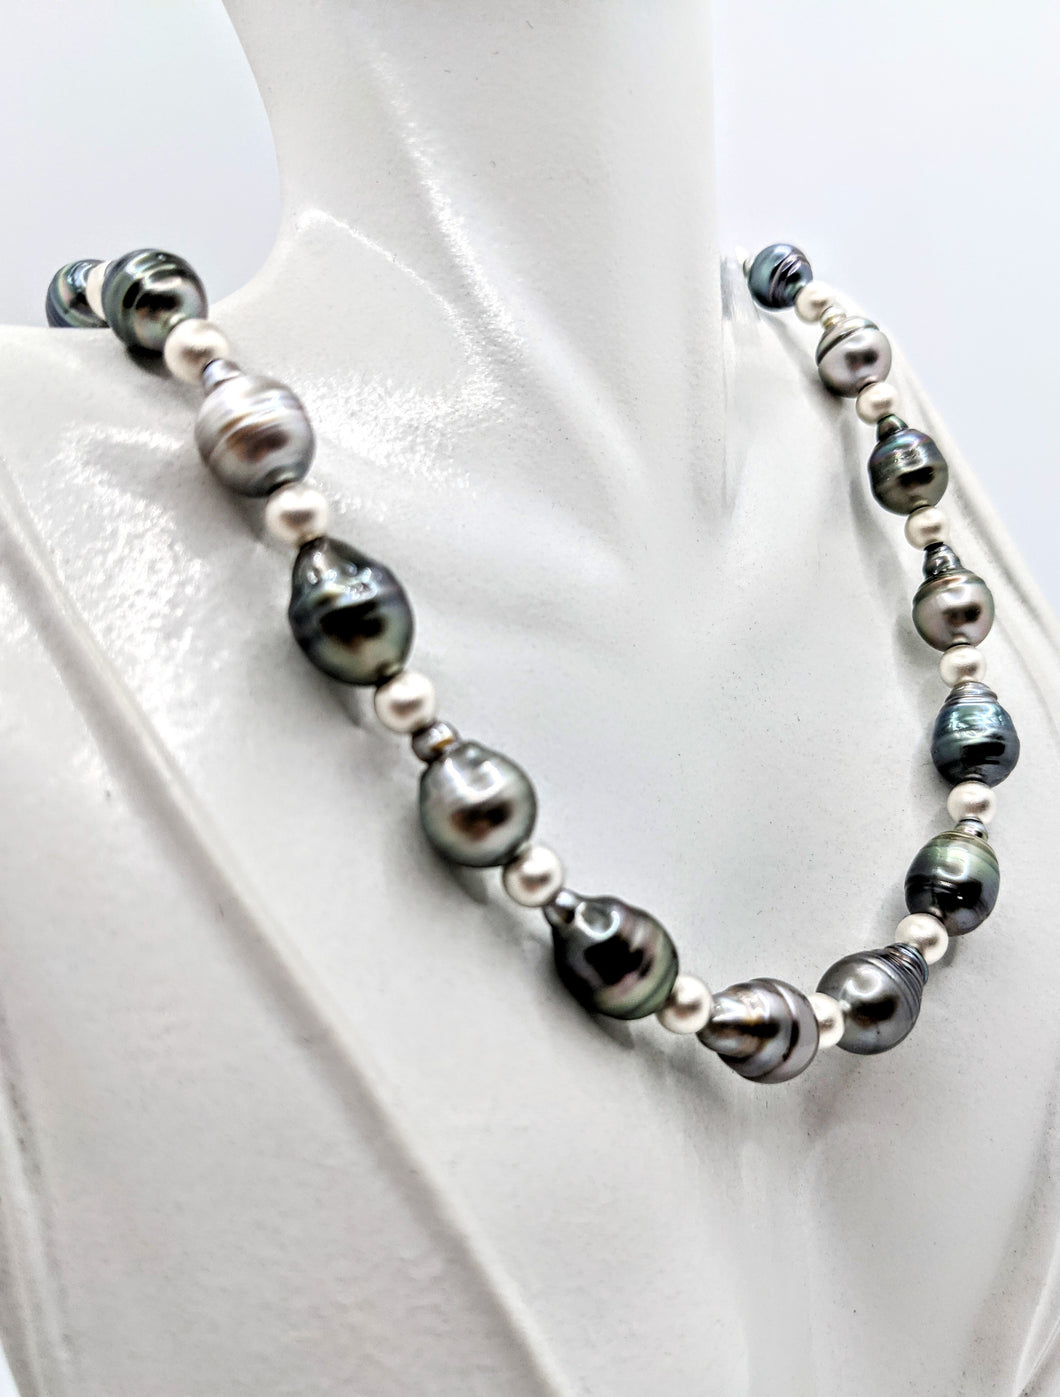 Tahitian pearl necklace with satin sterling silver accents